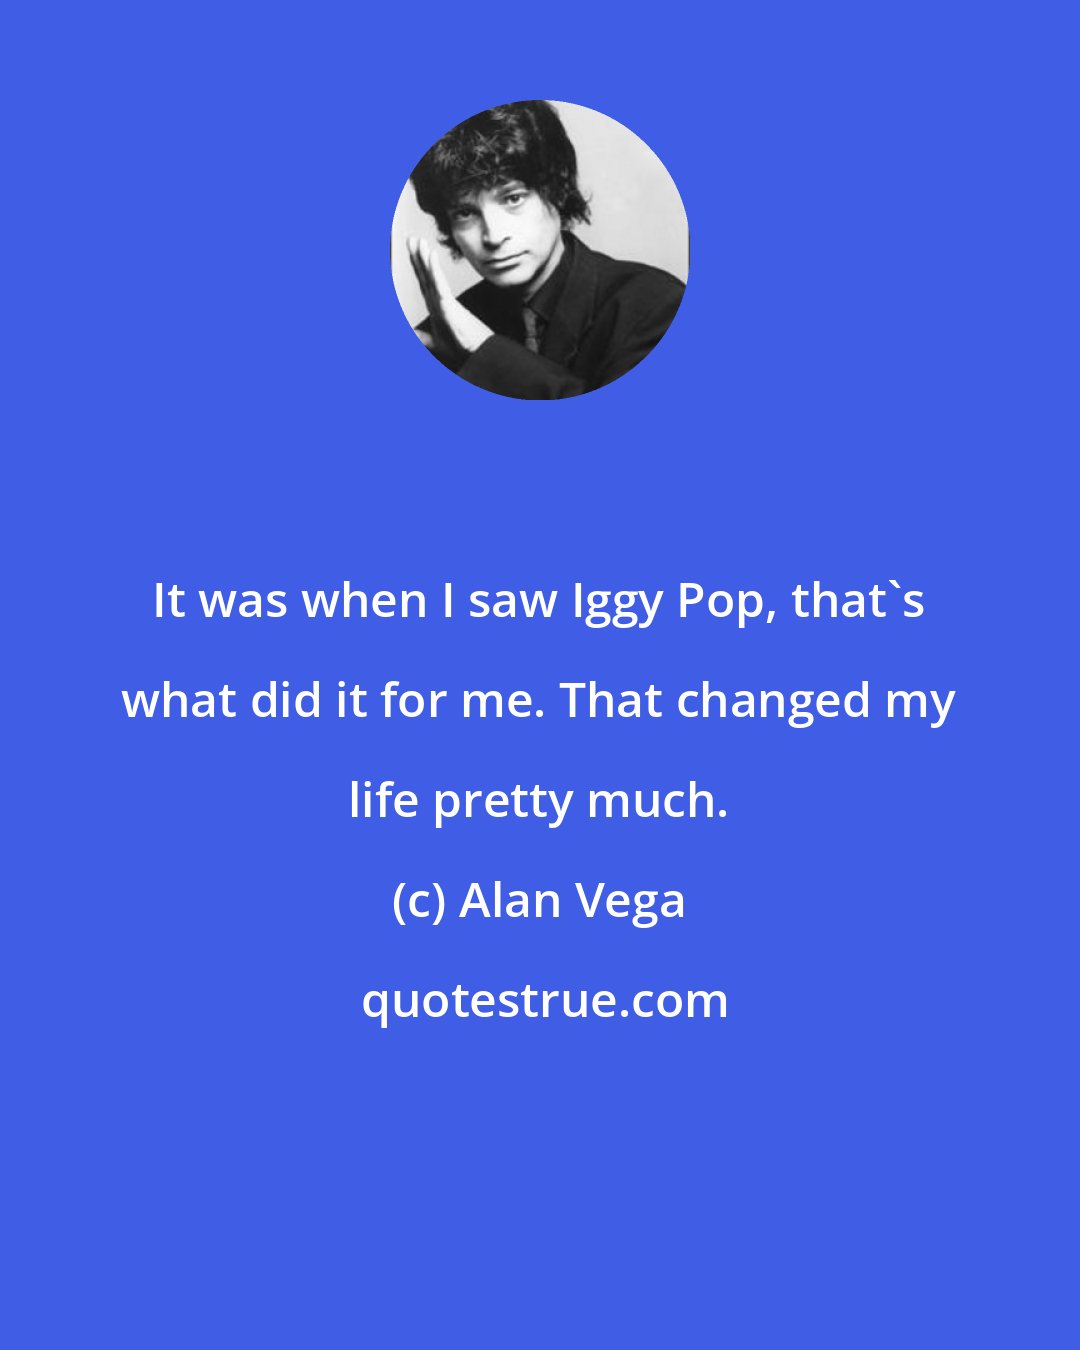 Alan Vega: It was when I saw Iggy Pop, that's what did it for me. That changed my life pretty much.